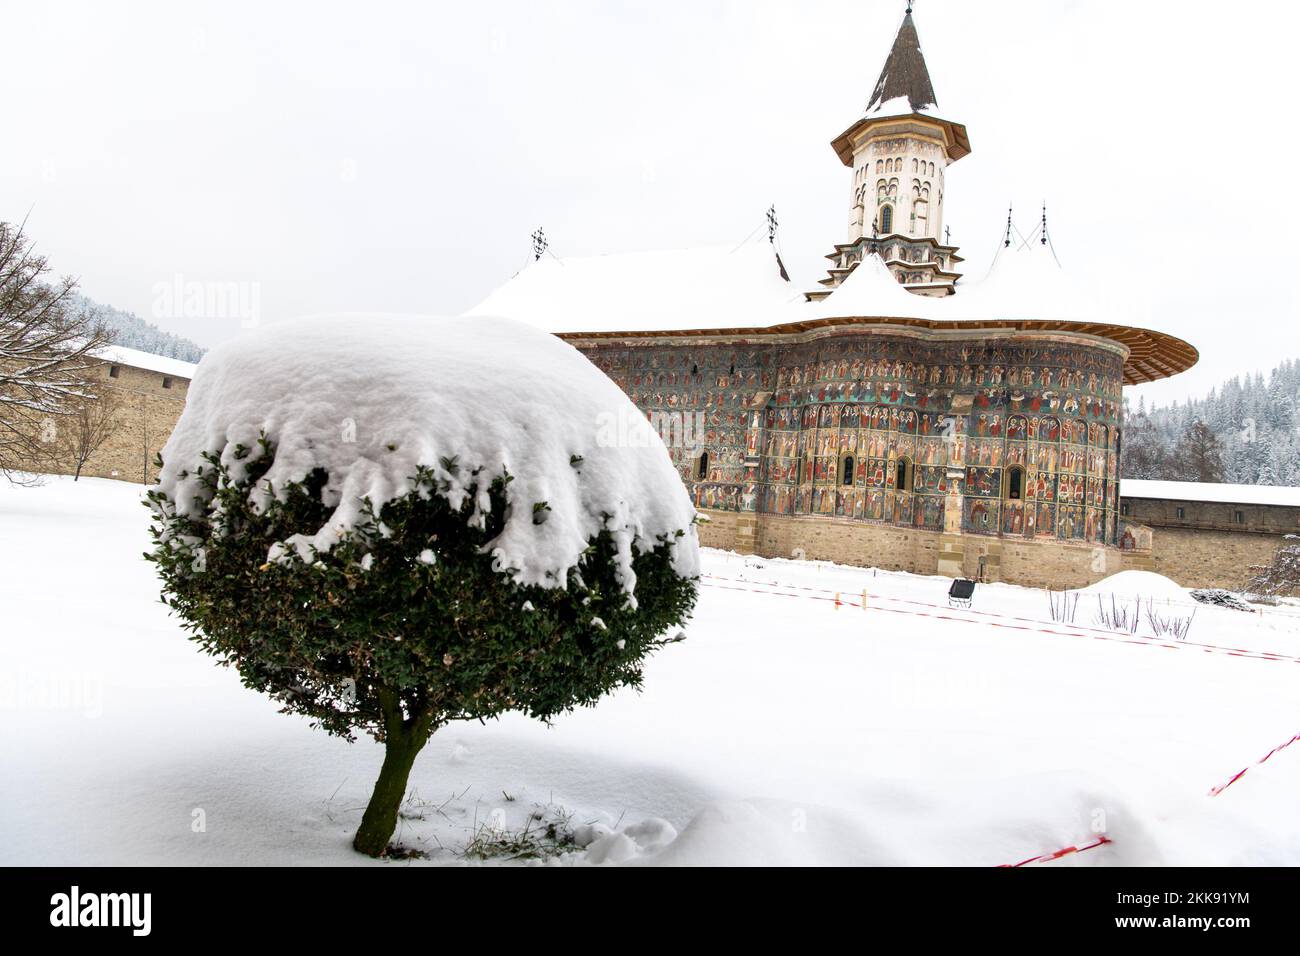 Sucevita, Romania, 2021-12-29. Sucevita Monastery in the Bukovina region under the snow. Their exterior walls are composed of frescoes painted in the Stock Photo